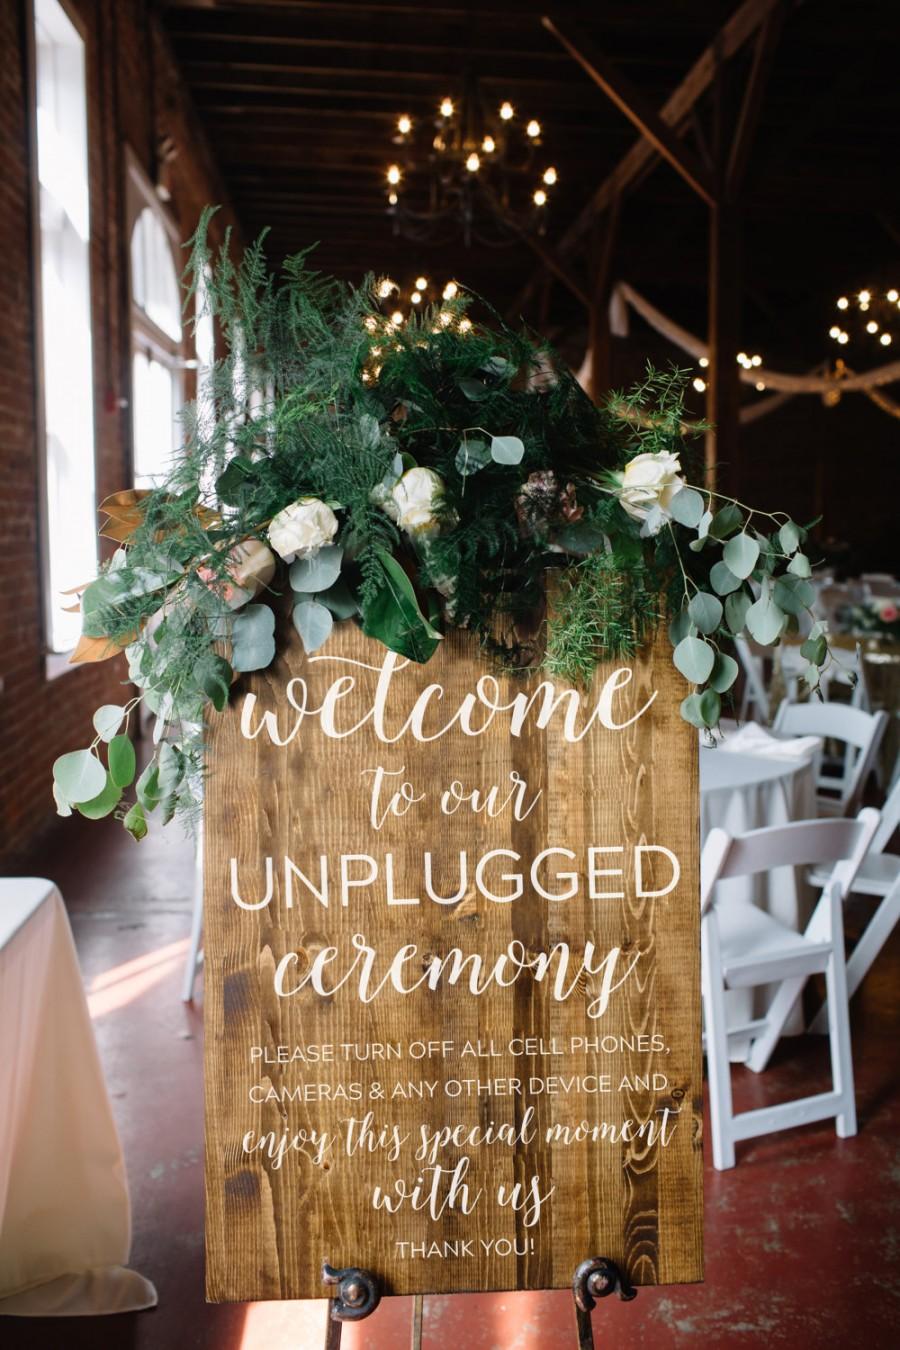 Hochzeit - Unplugged Wedding Sign, Unplugged Ceremony Sign - Keep Your Wedding Guests Unplugged - Rustic Wooden Wedding Sign - Elizabeth Collection